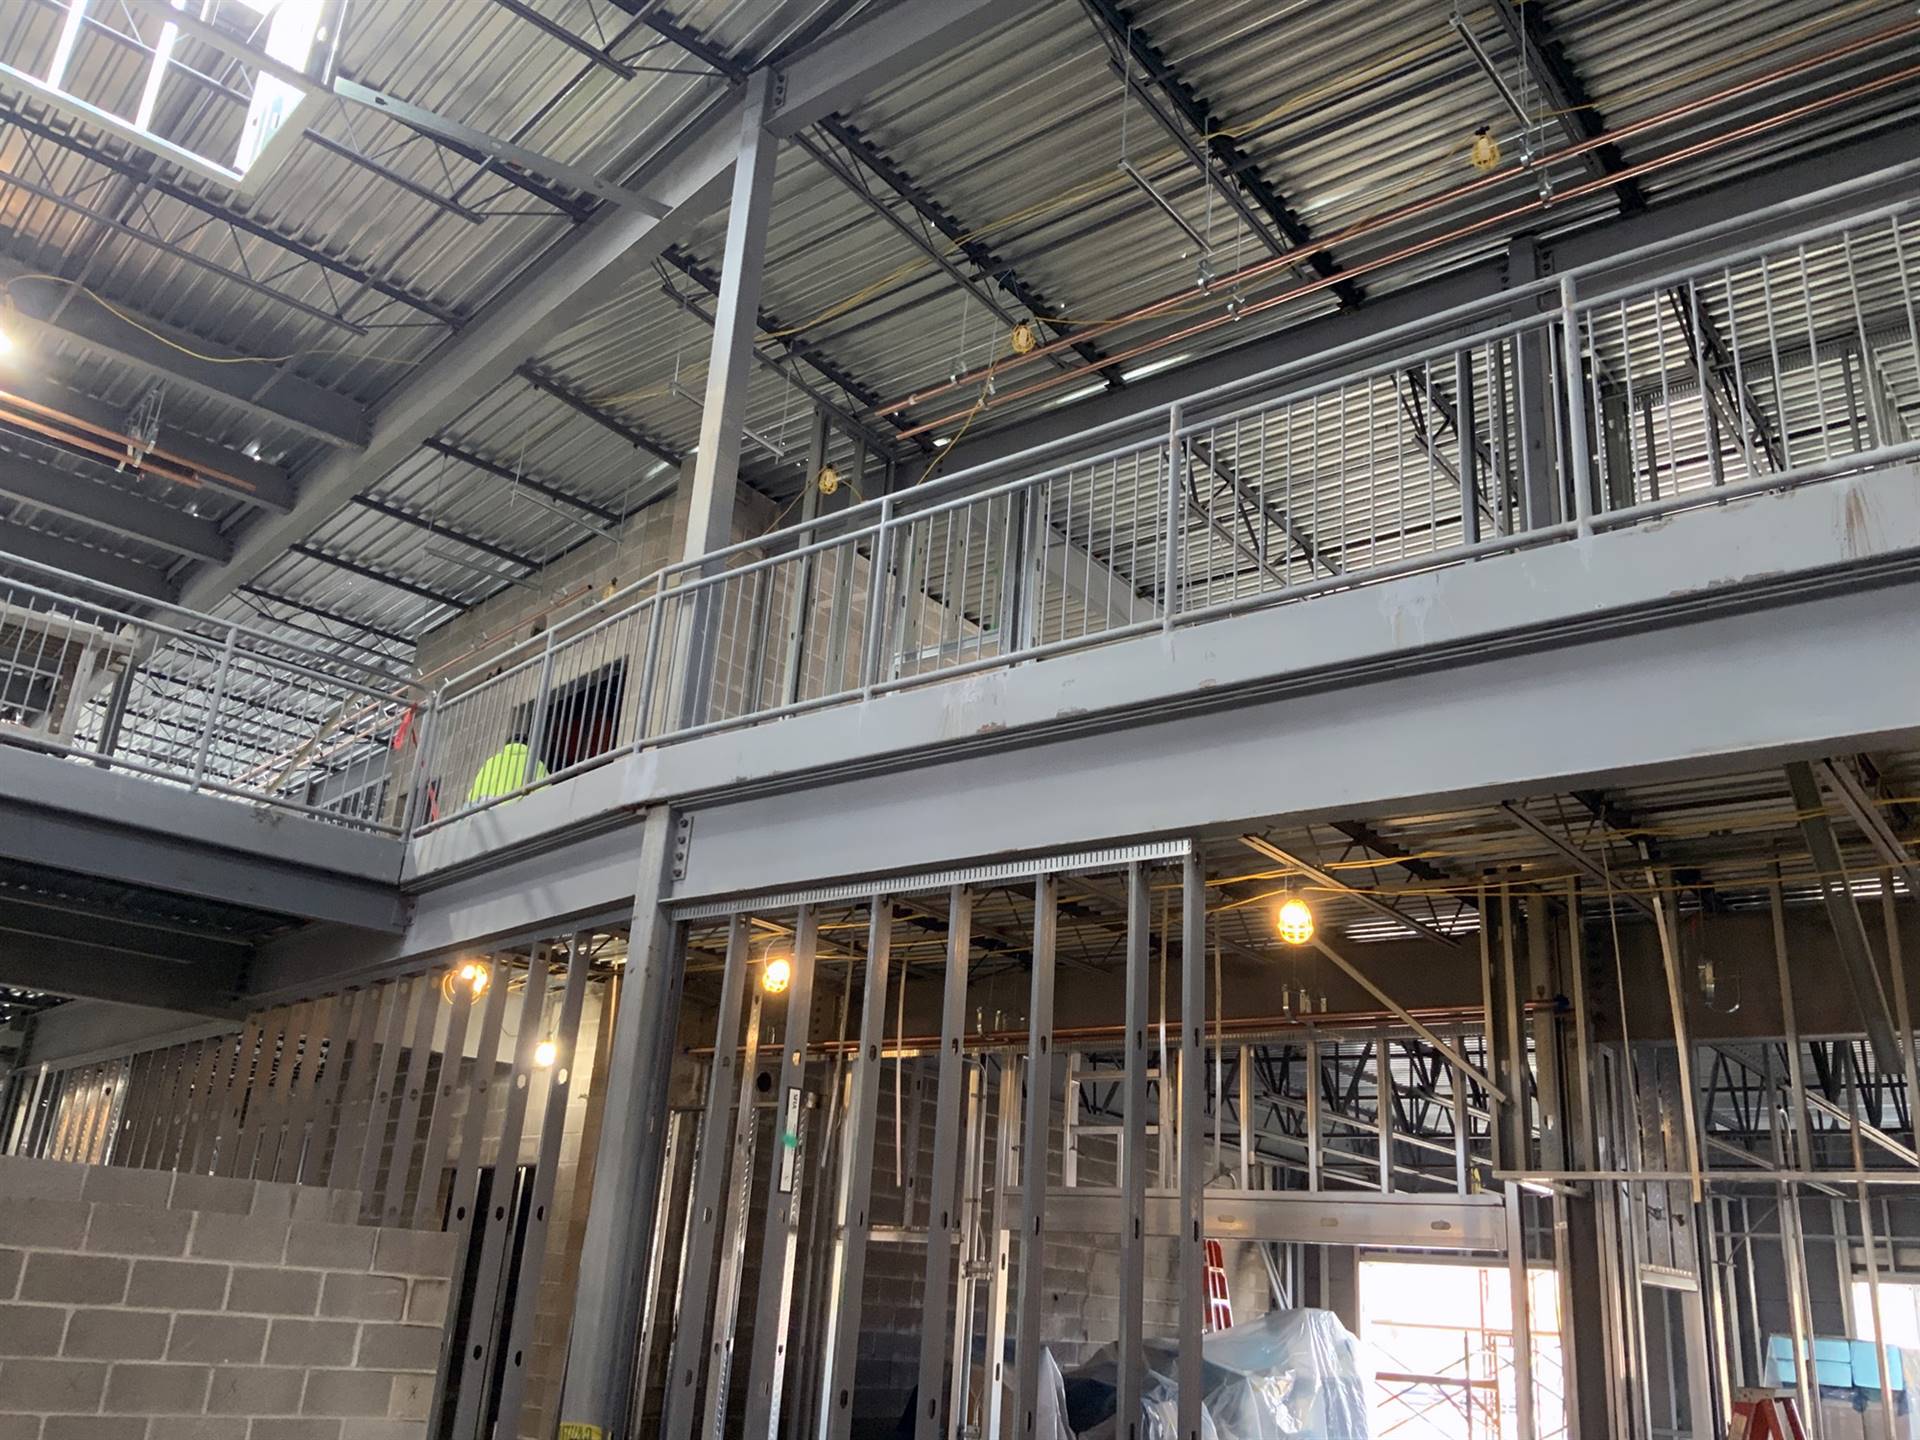 An interior view of progress on classrooms at Greensview Elementary School